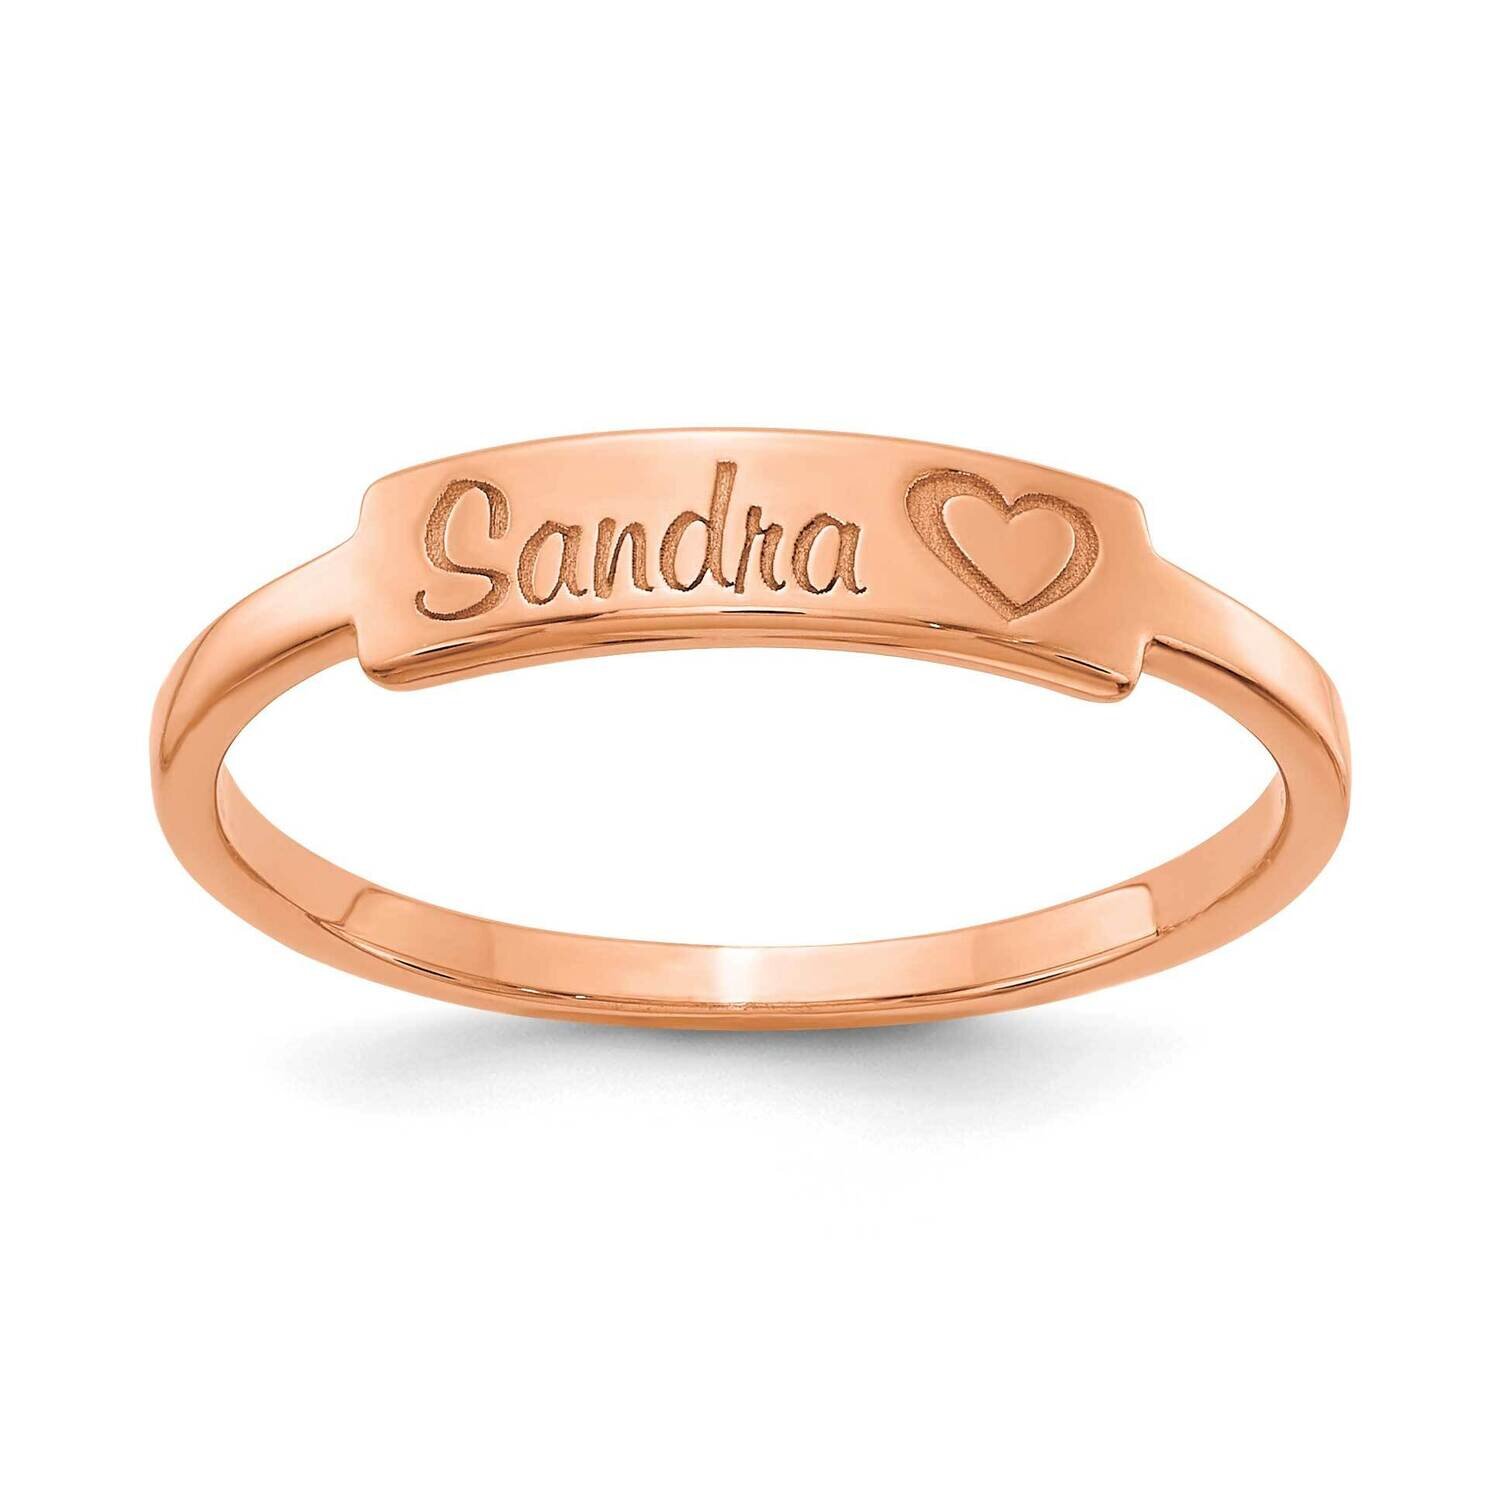 Personalized Name Bar Ring 14k Rose Gold XNR89R